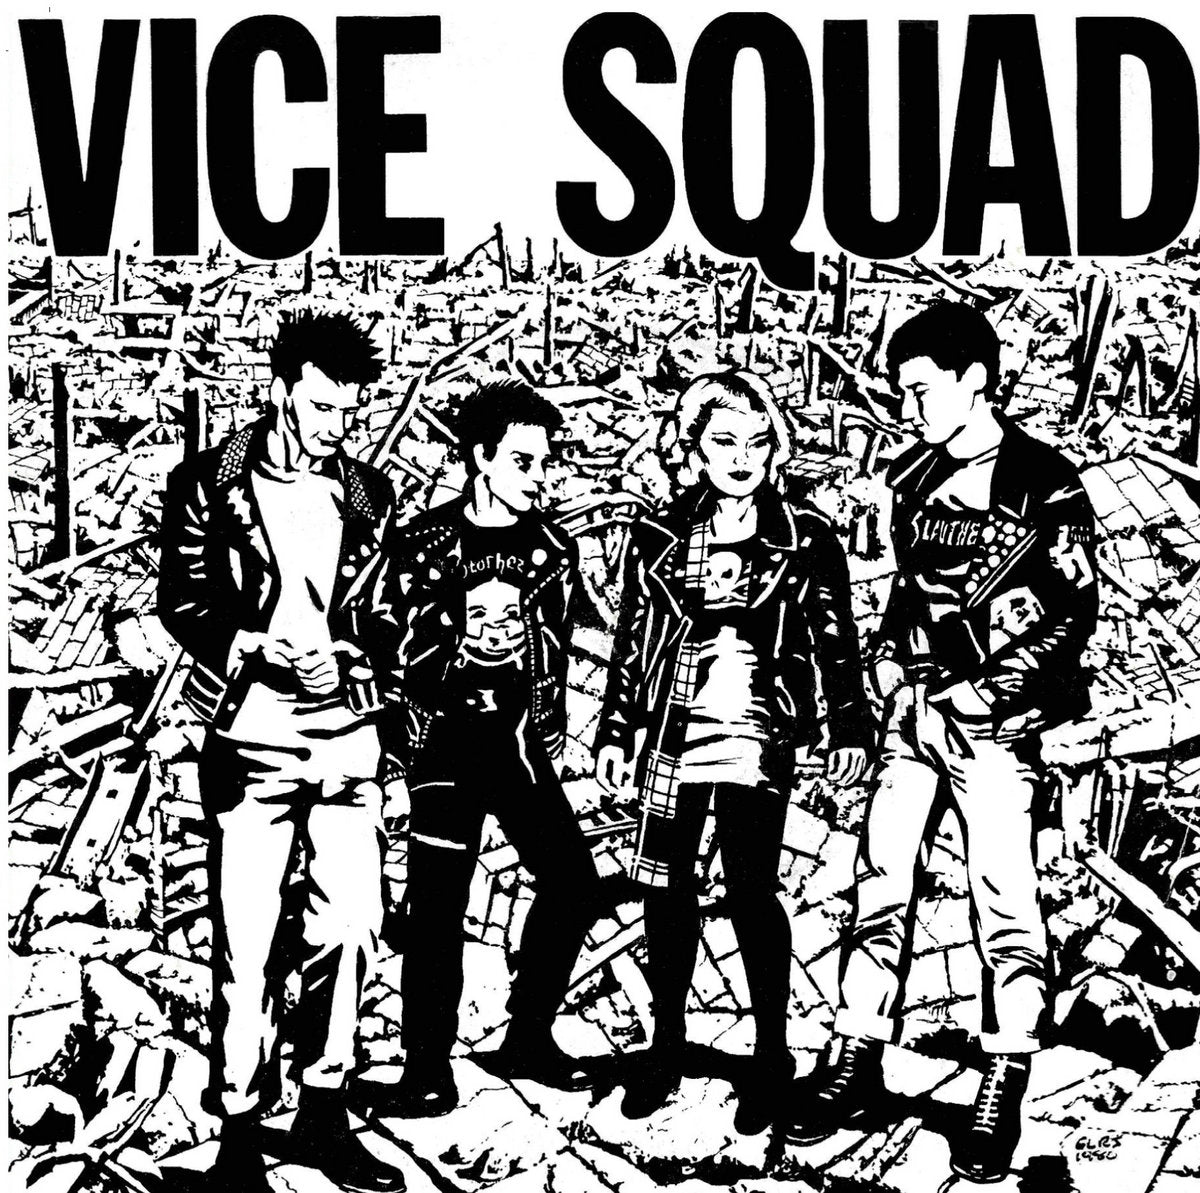 VICE SQUAD - Last Rockers / Resurrection (Remastered) - 12'' EP - Pink/White Marbled Vinyl